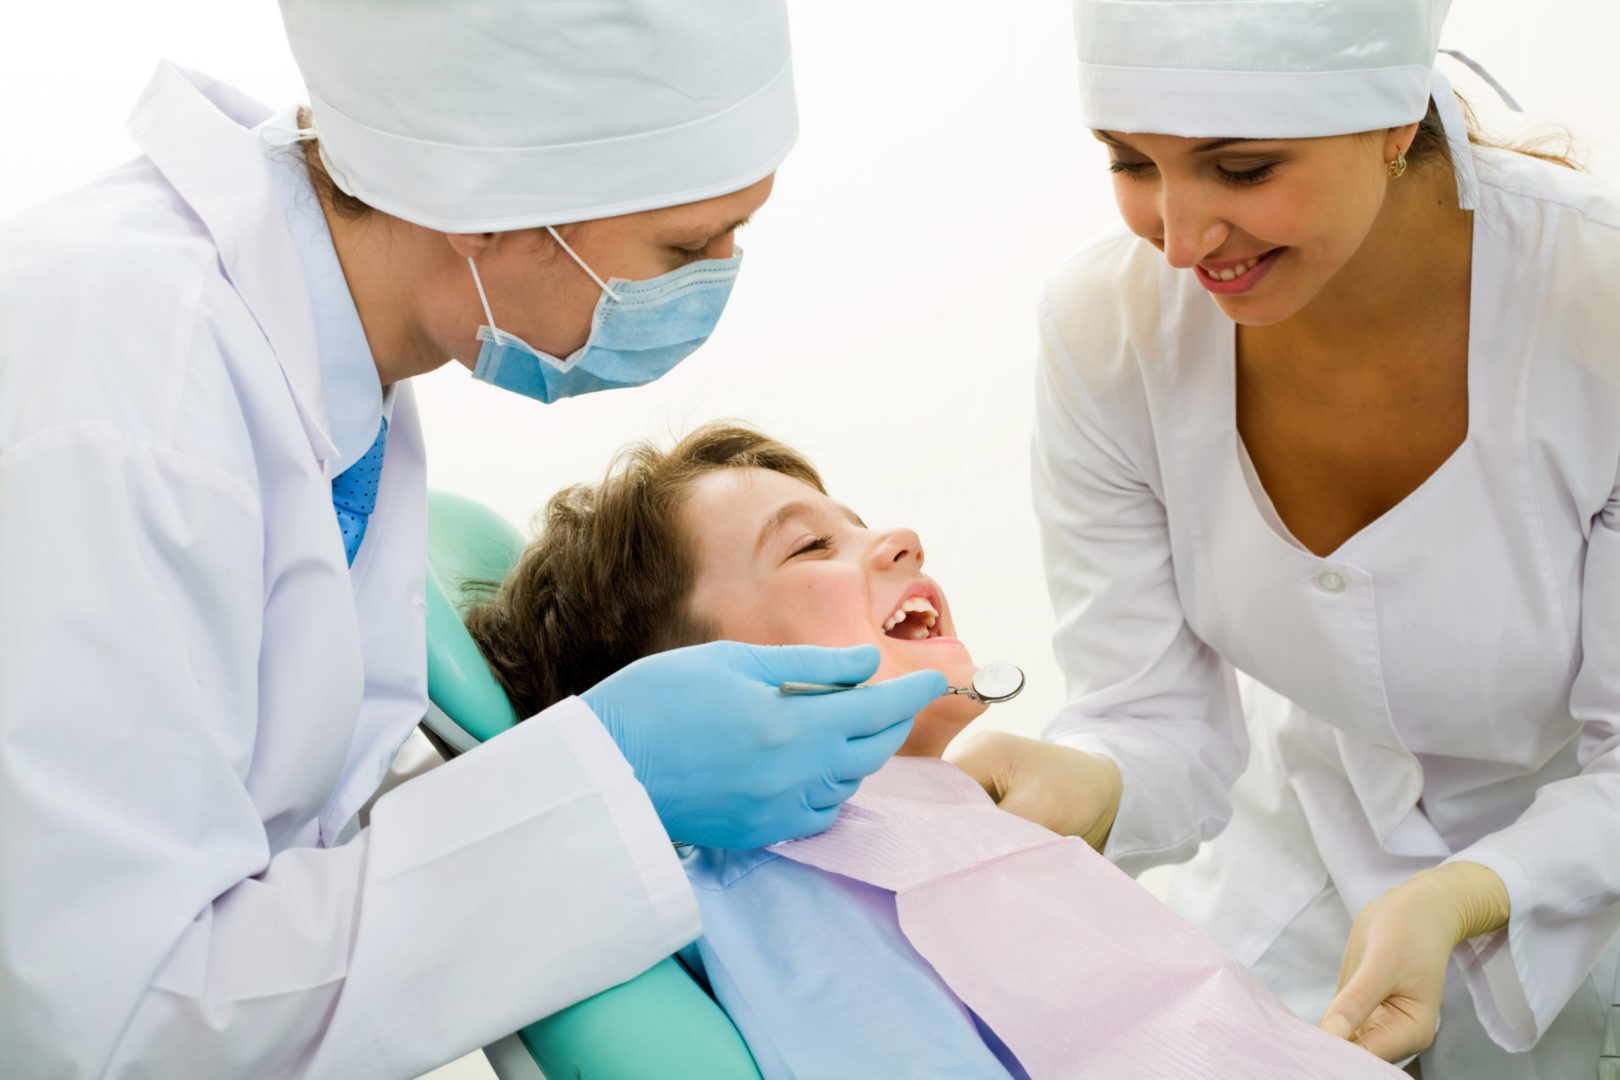 two dentists performing dental procedure on a patient